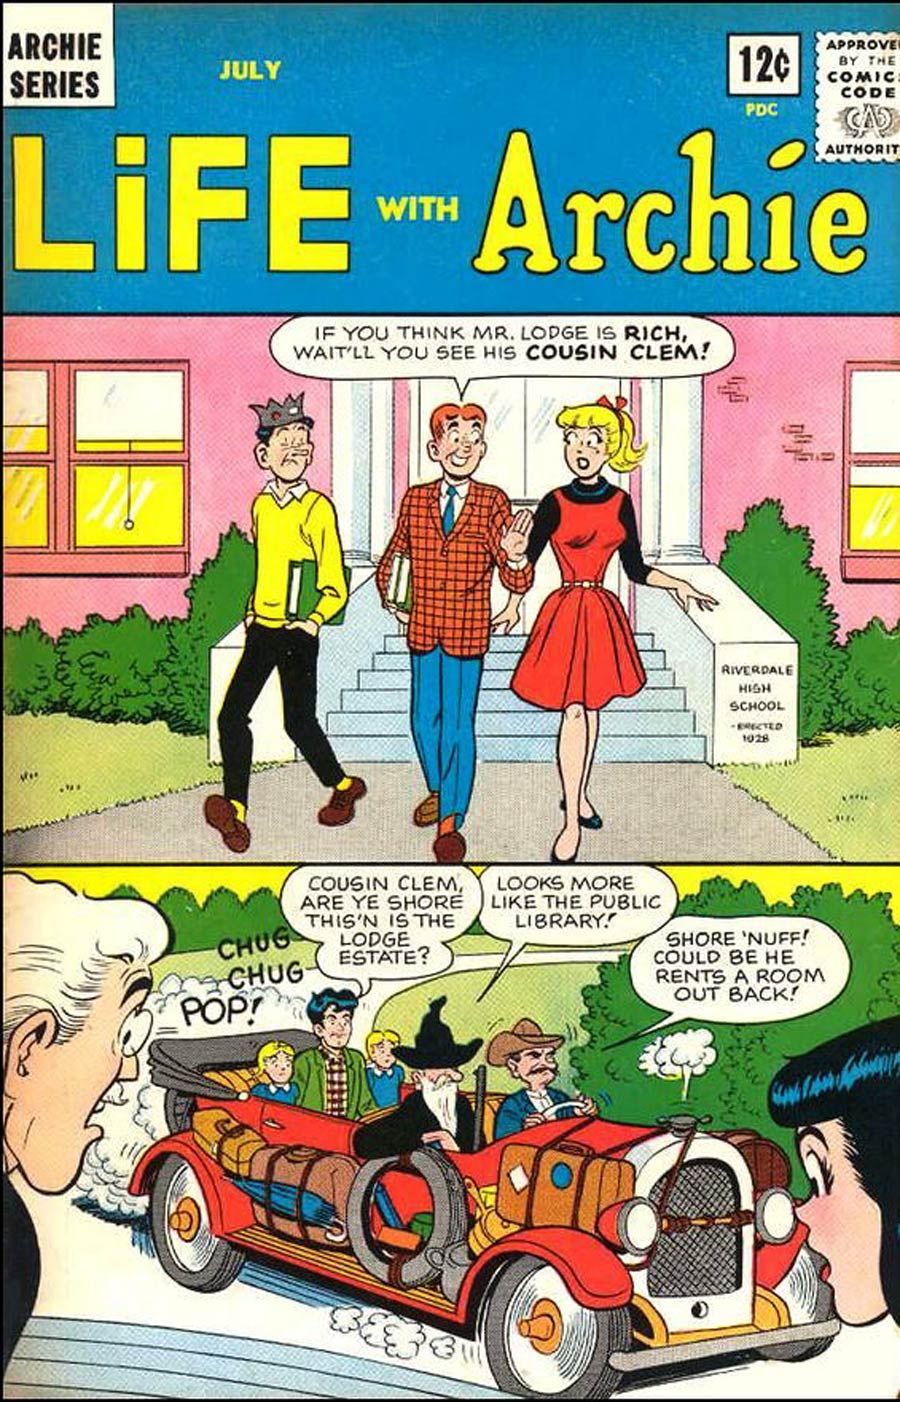 Life With Archie #28